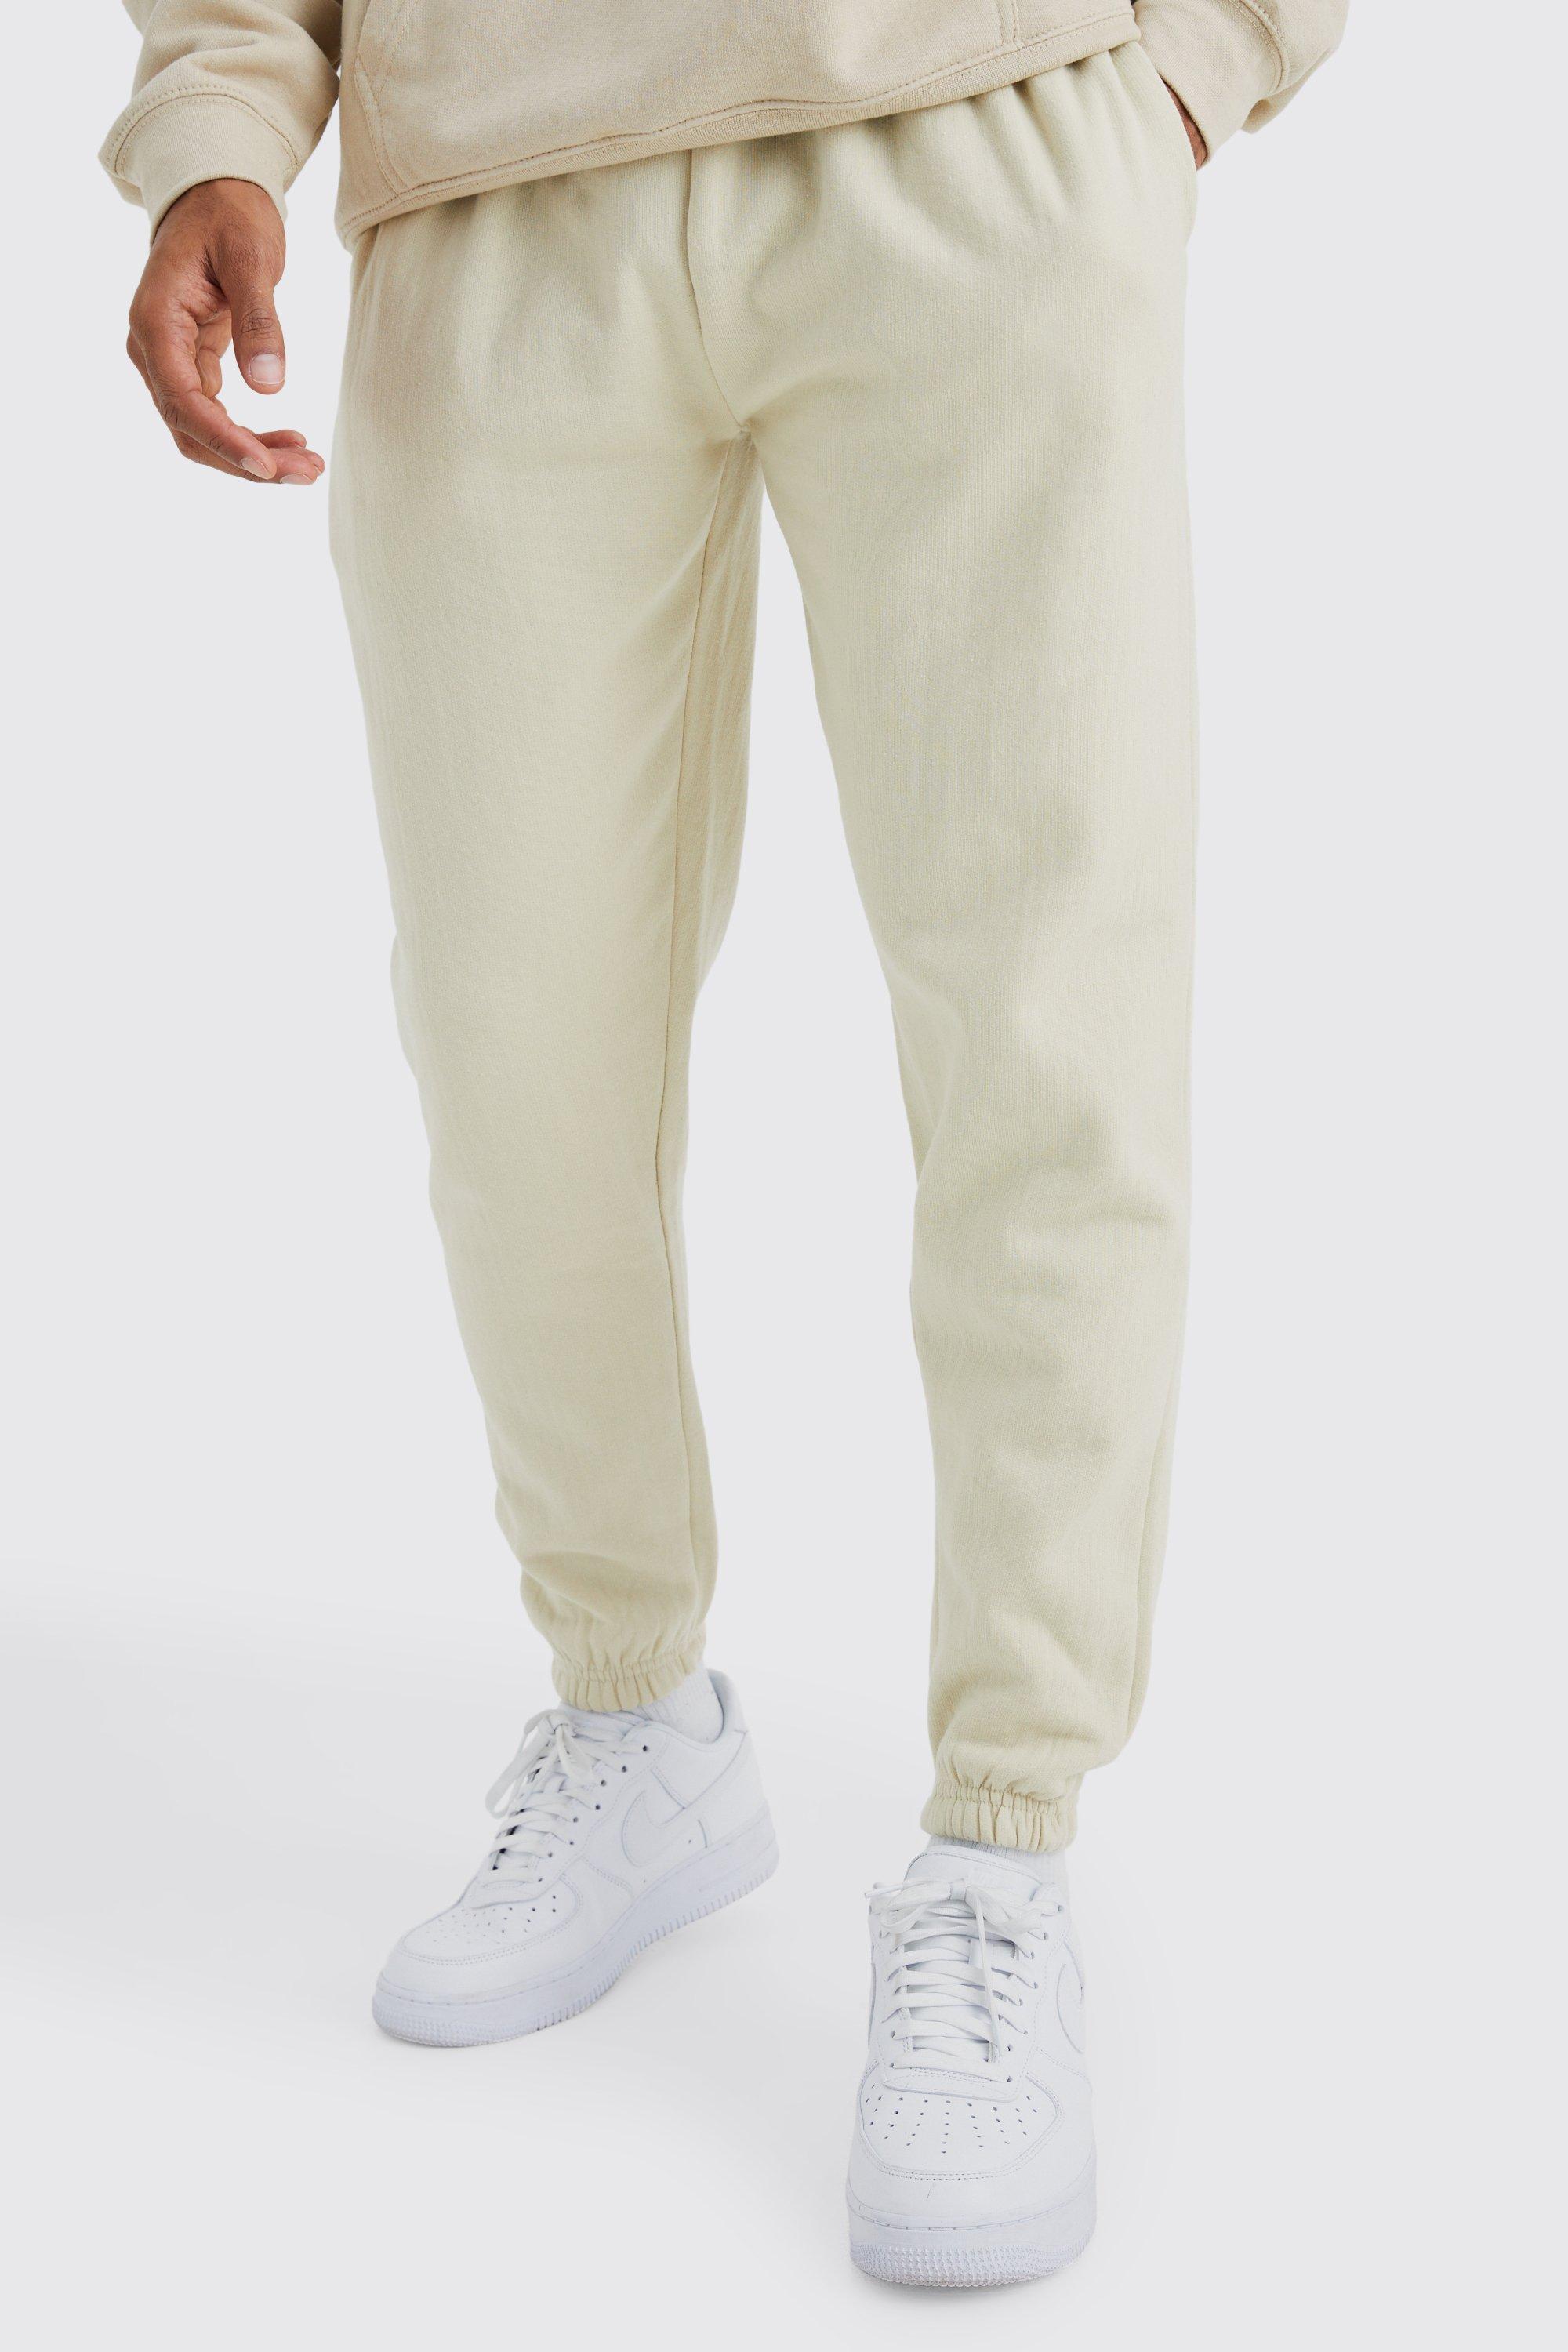 Boohoo Core Fit Basic Jogger in Natural | Lyst